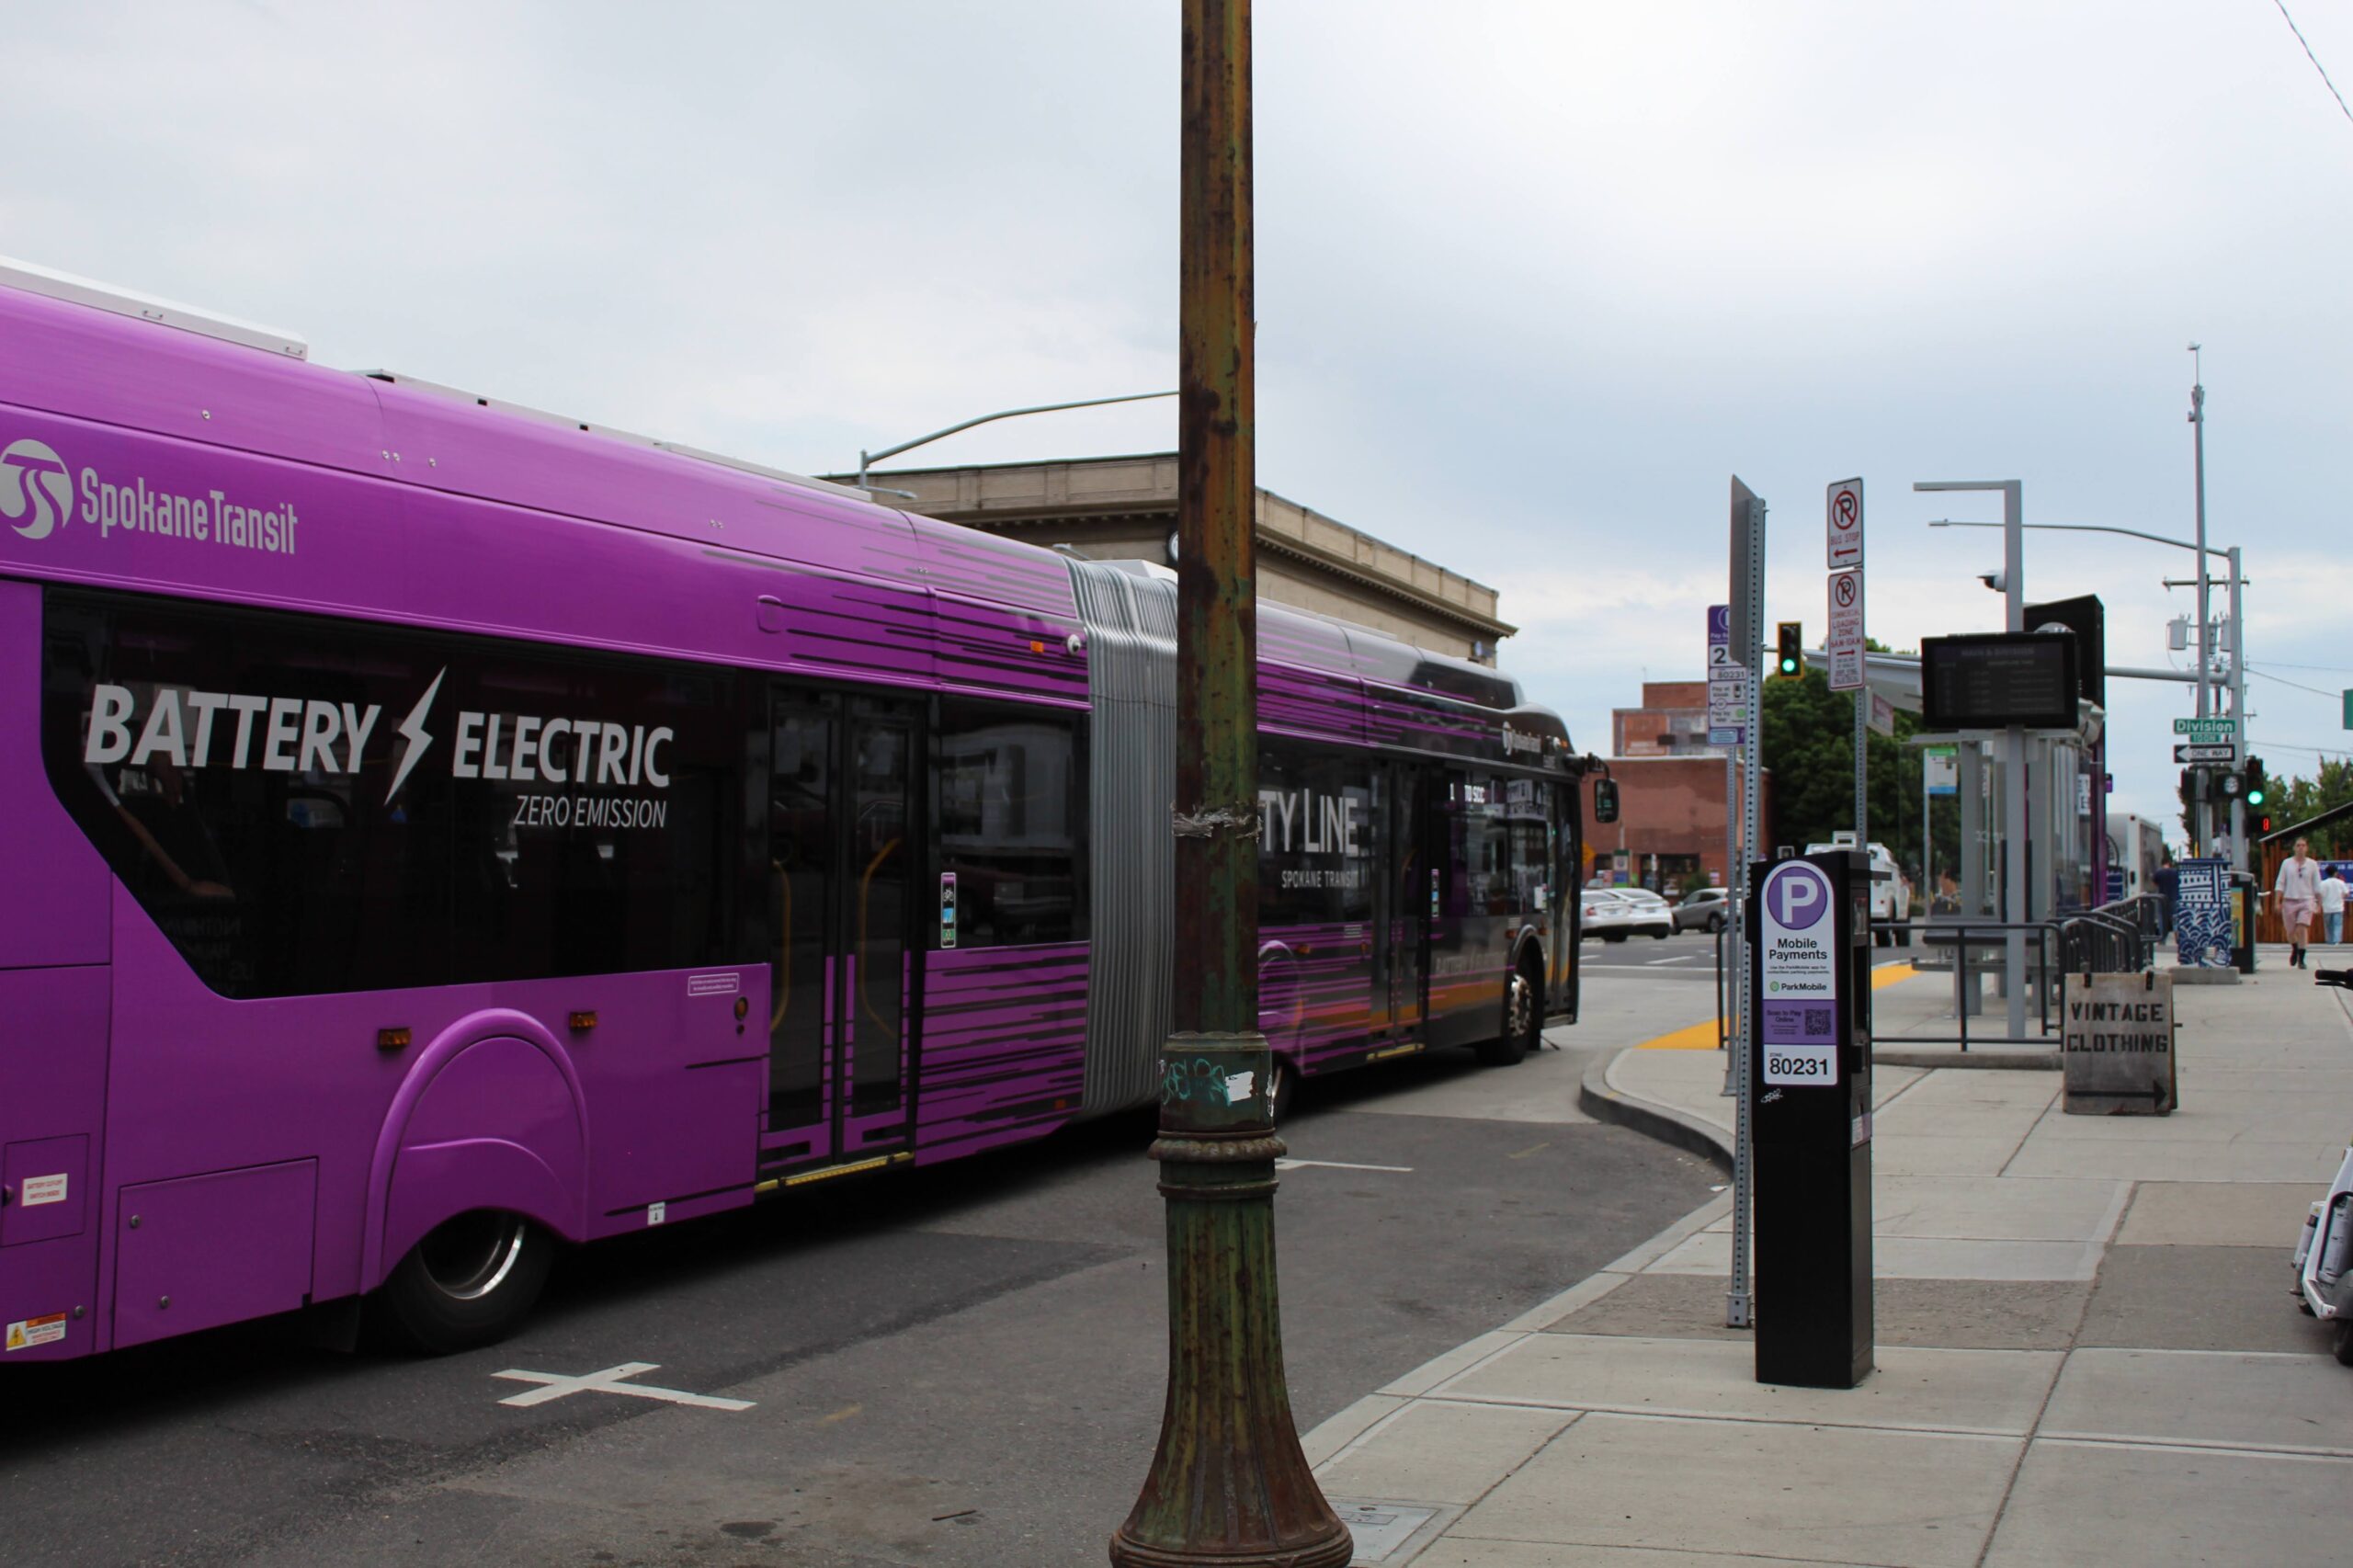 Pink CityLine bus pulls up to a bus stop in Spokane